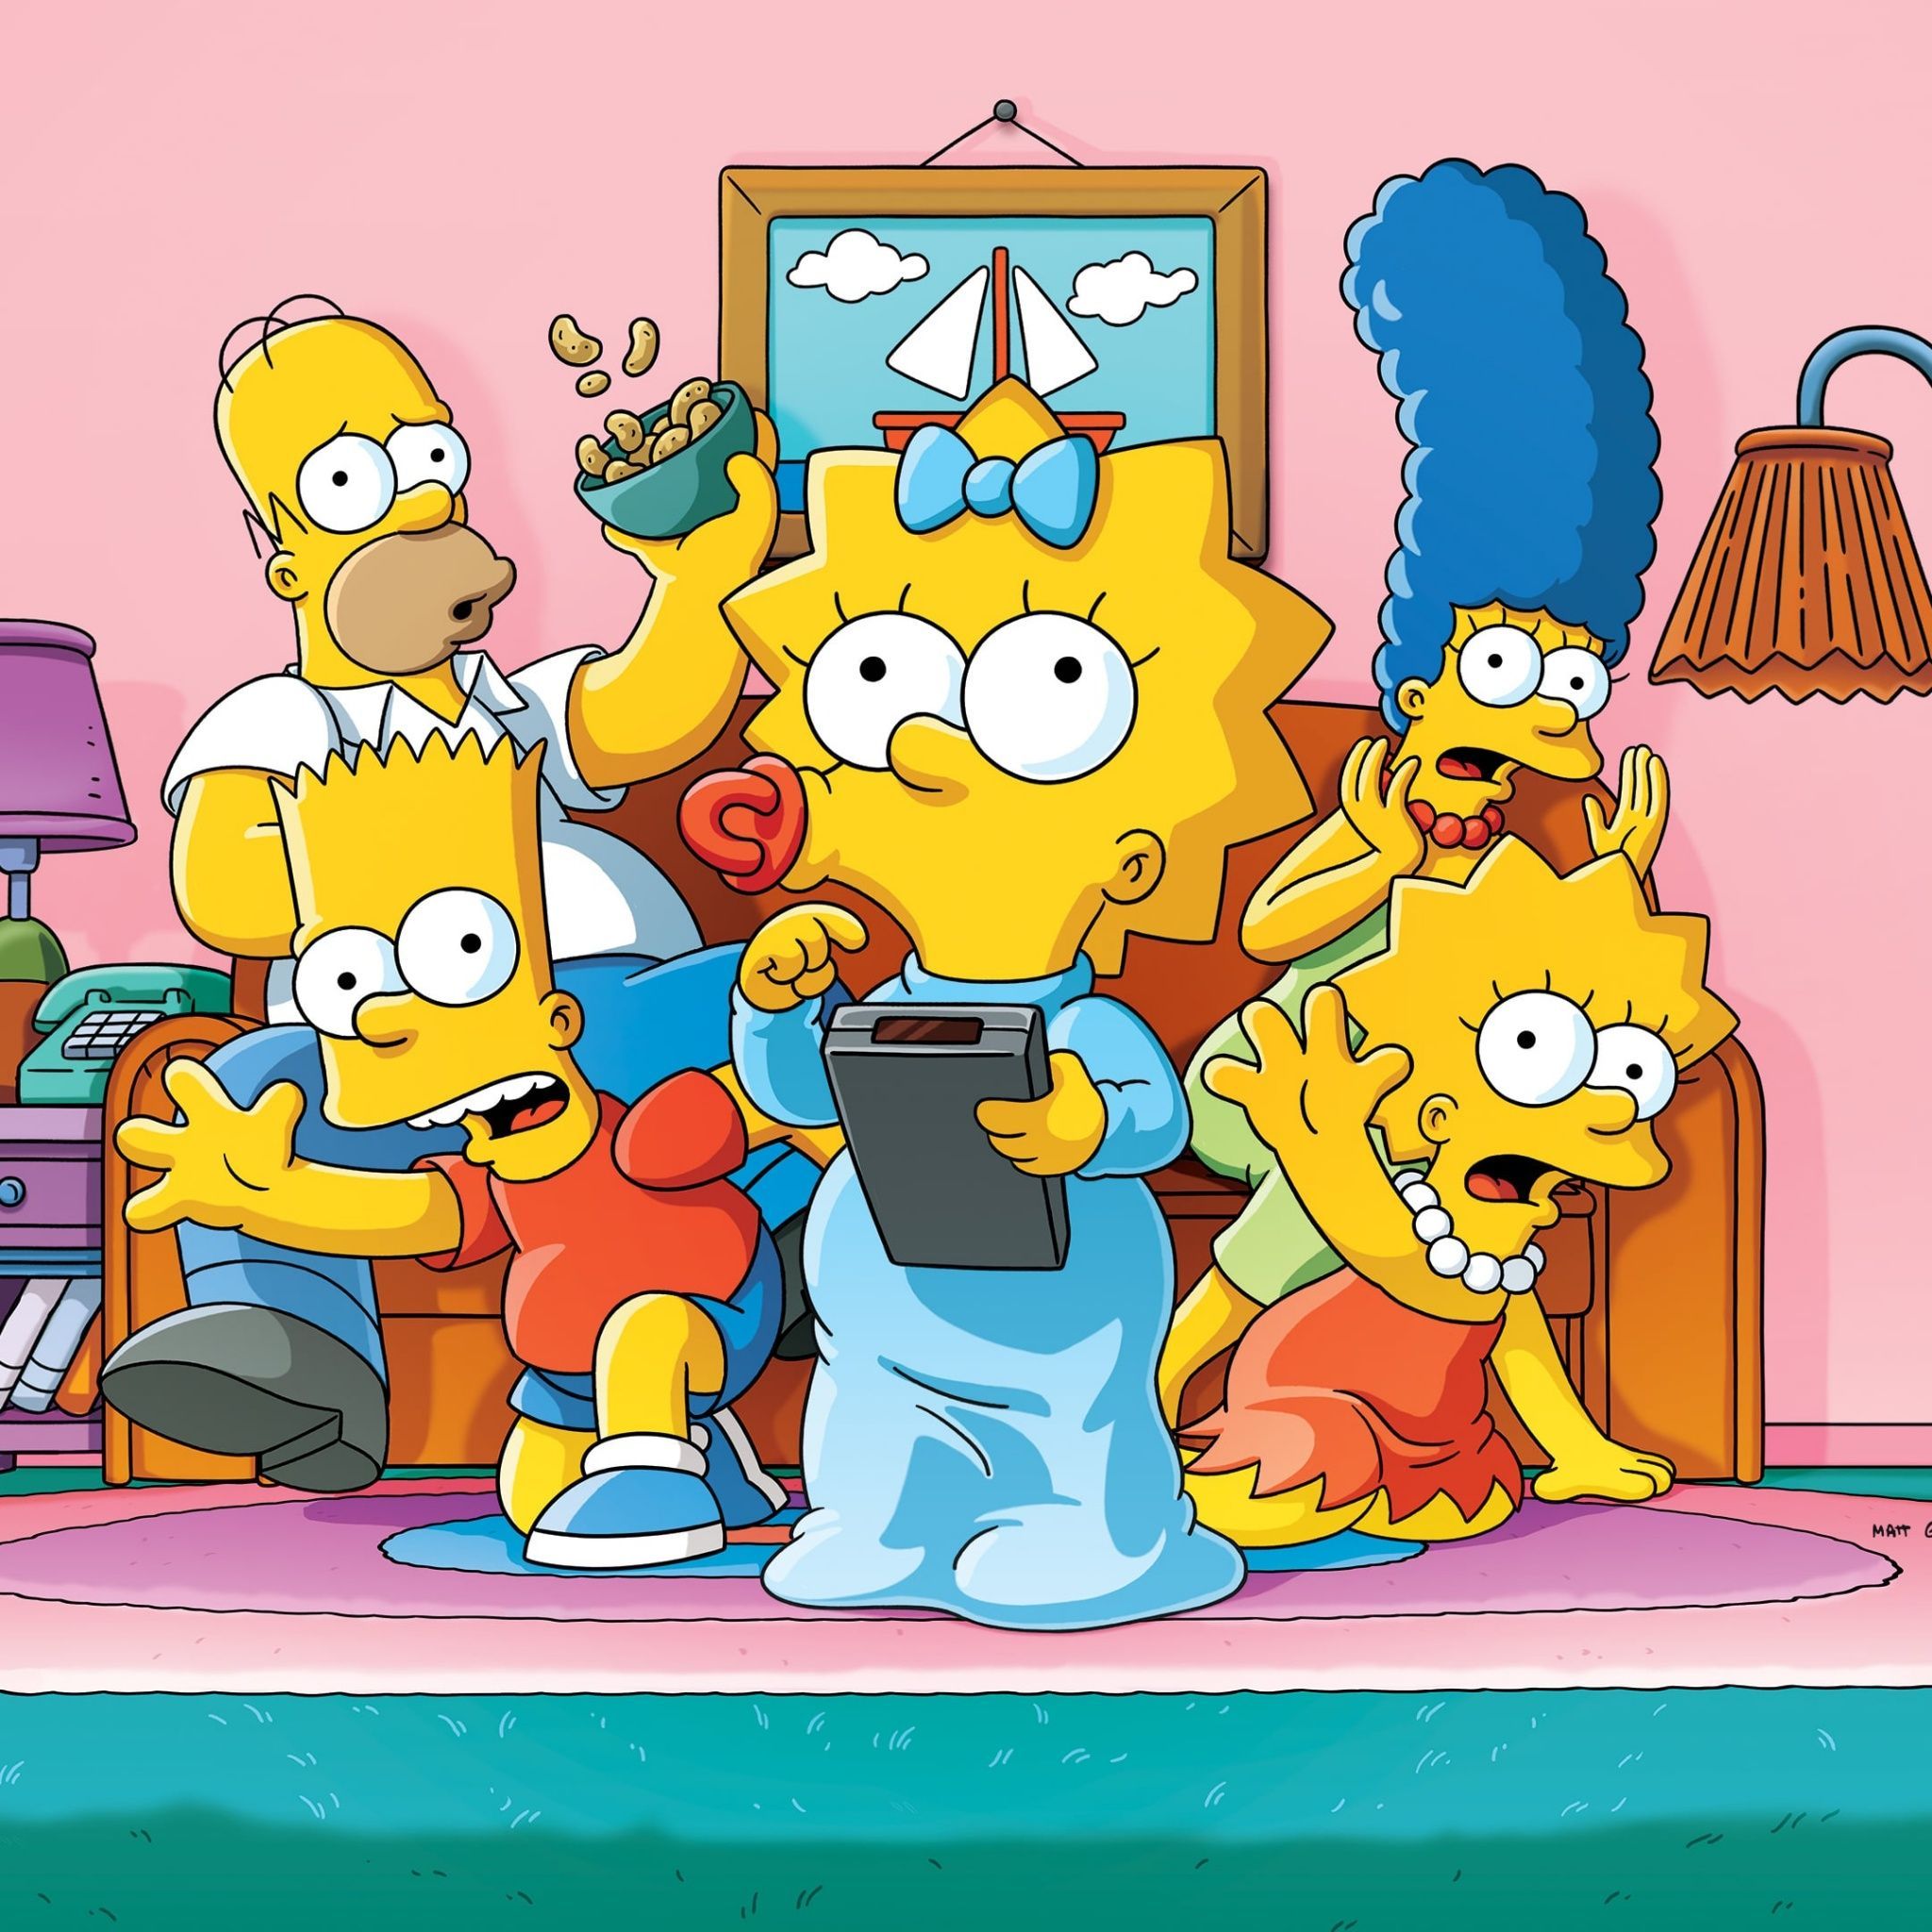 The Simpsons is a long-running animated series that follows the lives of the titular family, the Smiths, as they live in the fictional town of Springfield. - Homer Simpson, Maggie Simpson